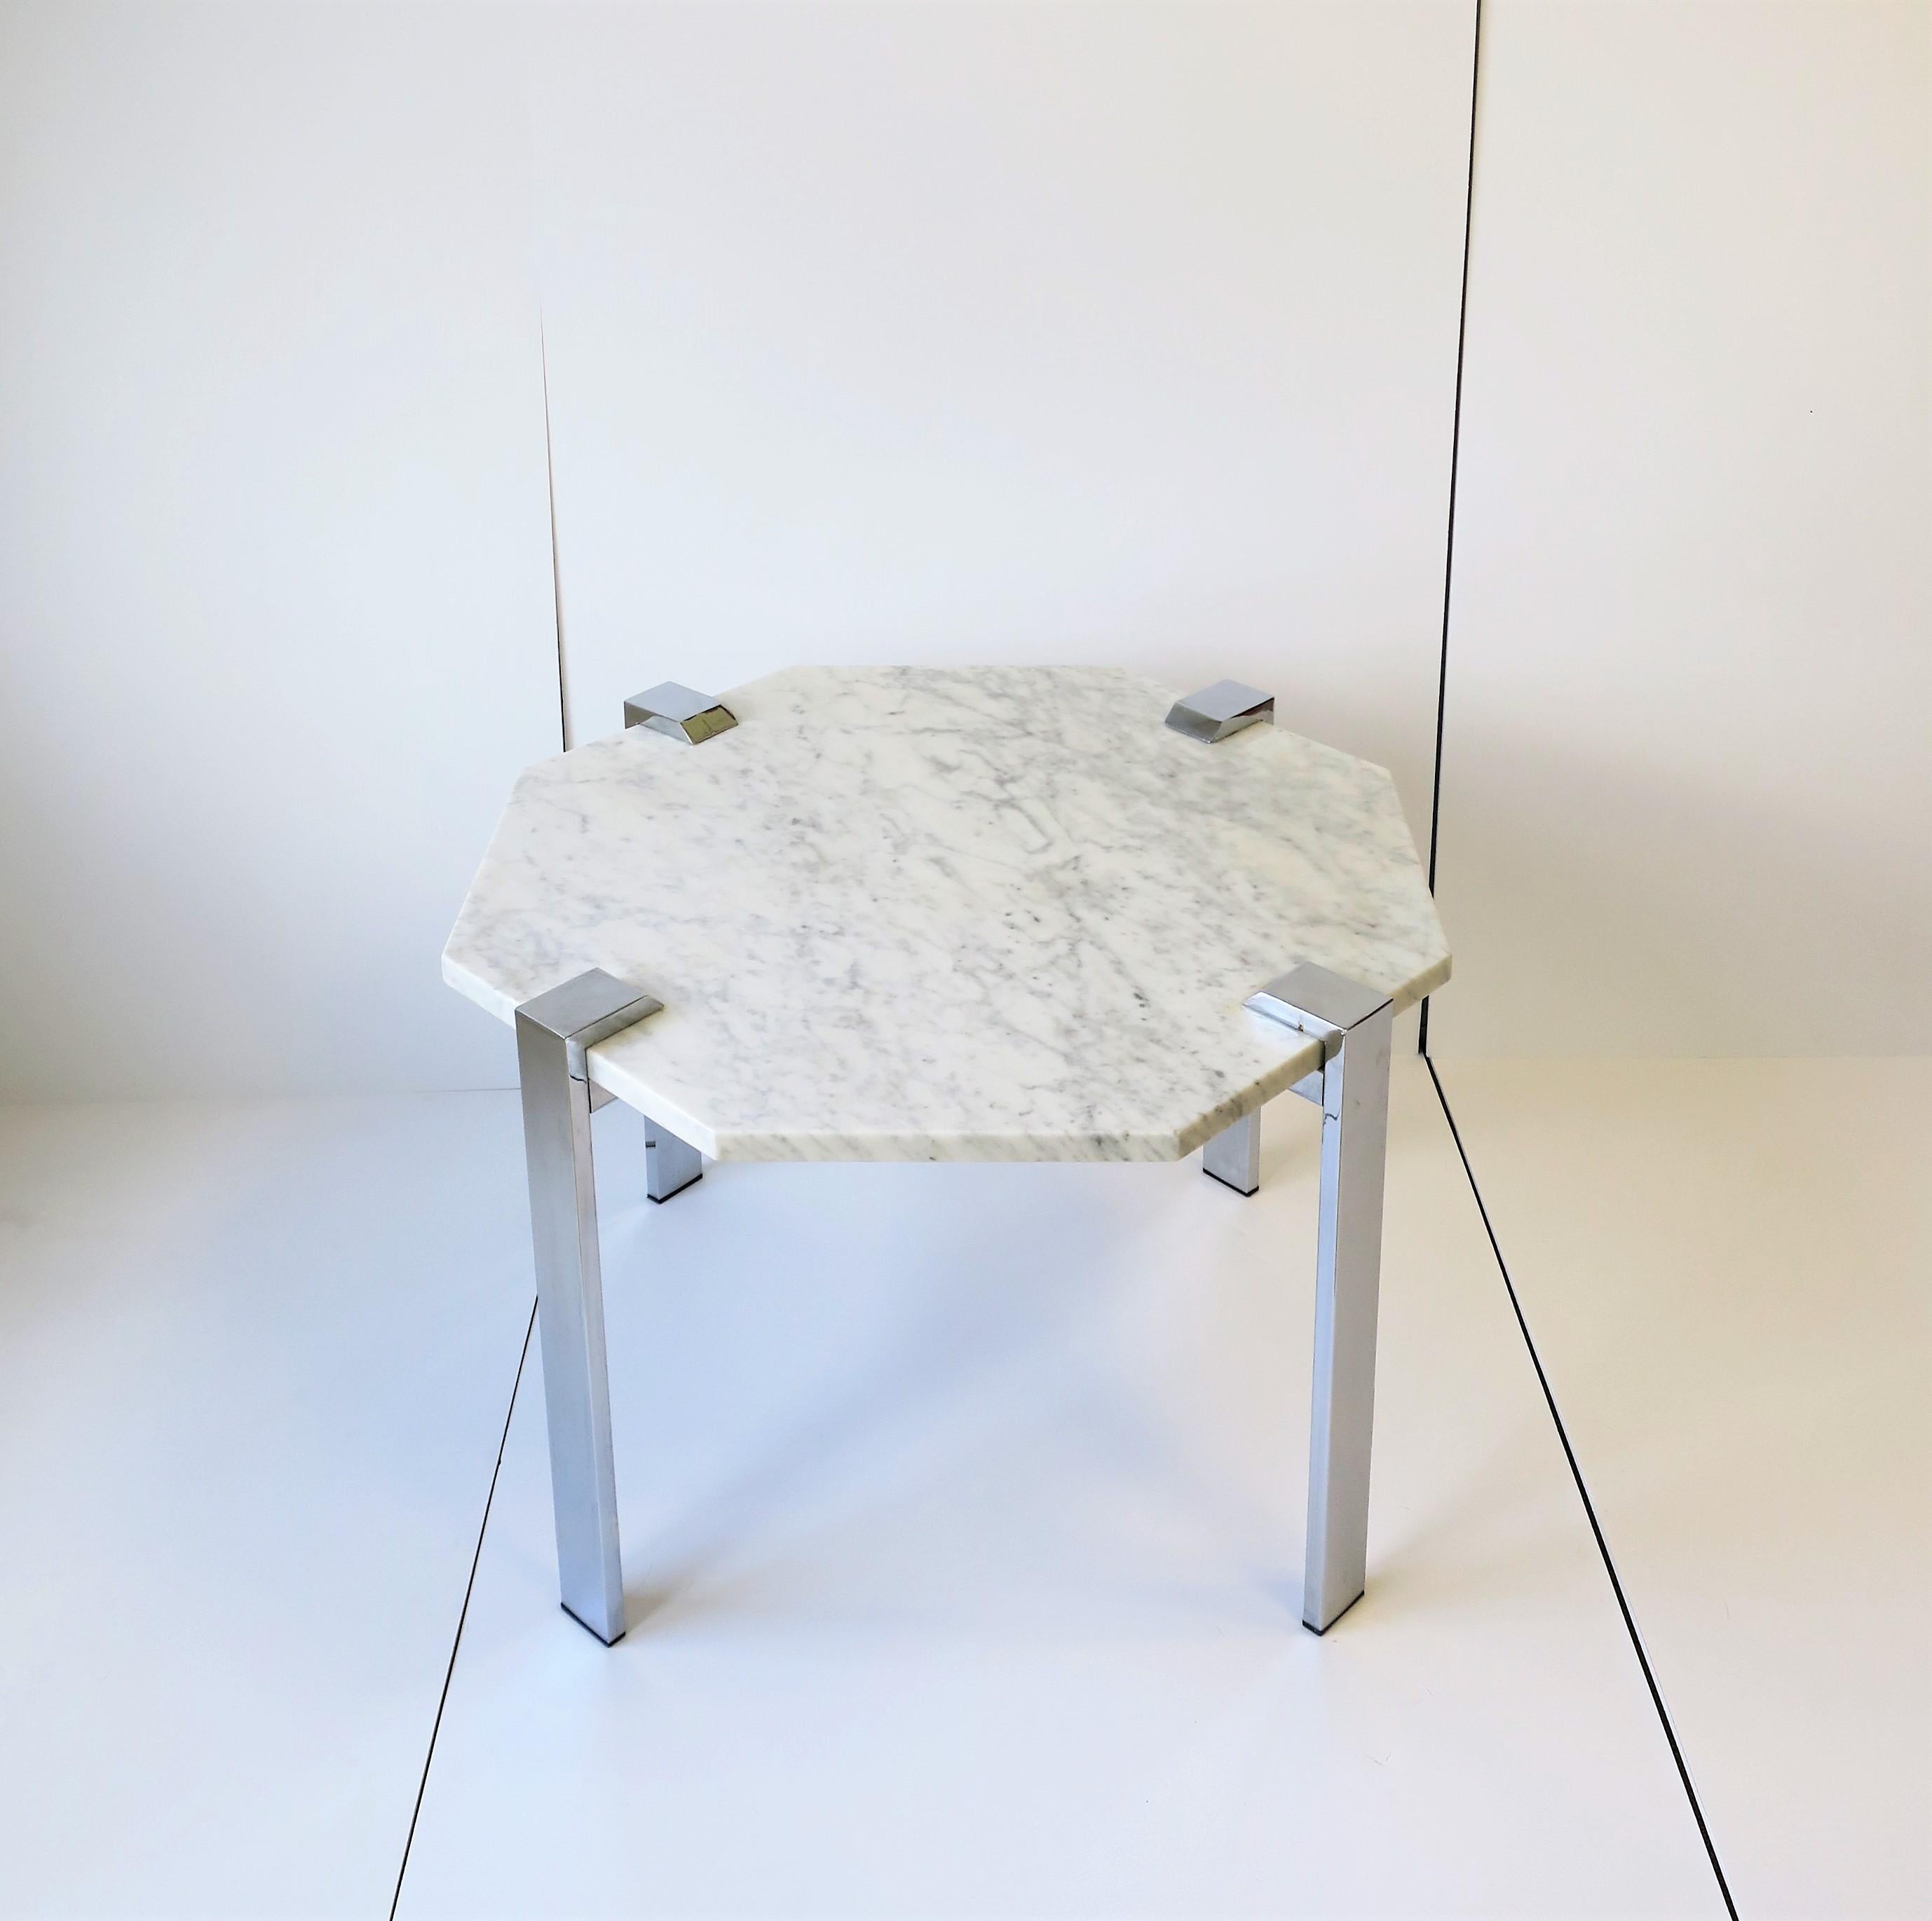 A substantial Italian '70s modern or postmodern [Post-Modern] chrome and Carrara white marble side, end or coffee/cocktail table from Italy, circa 1970s. Carrara marble octagonal top is white with shades of grey/dark grey veining, measuring 3/4